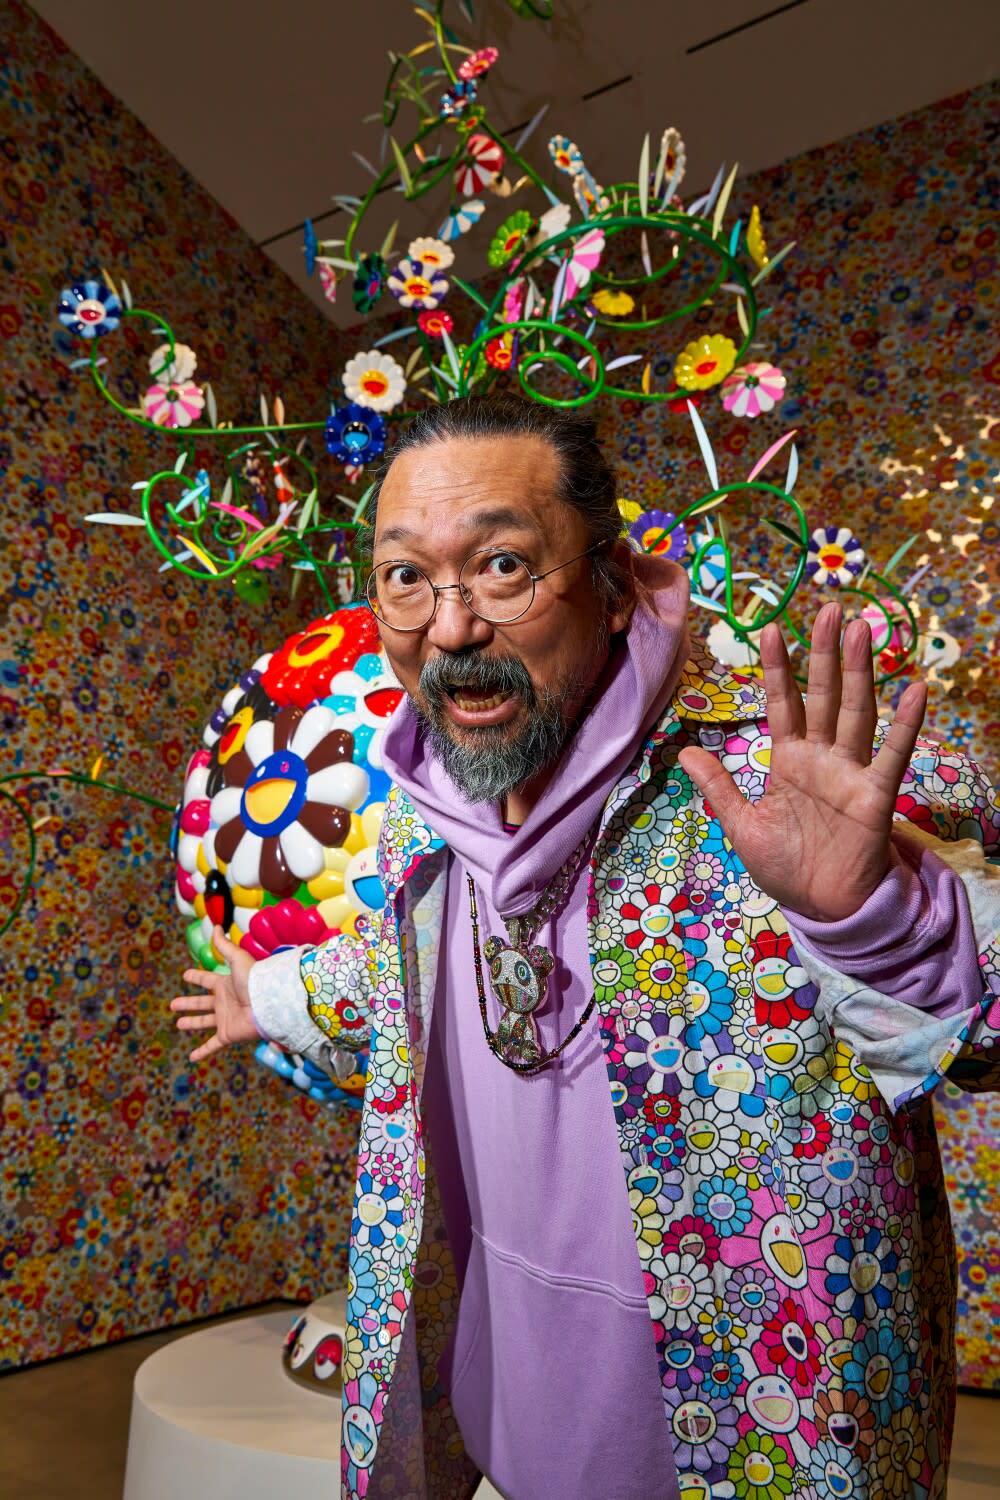 A man in colorful clothing poses in front of a art sculpture.